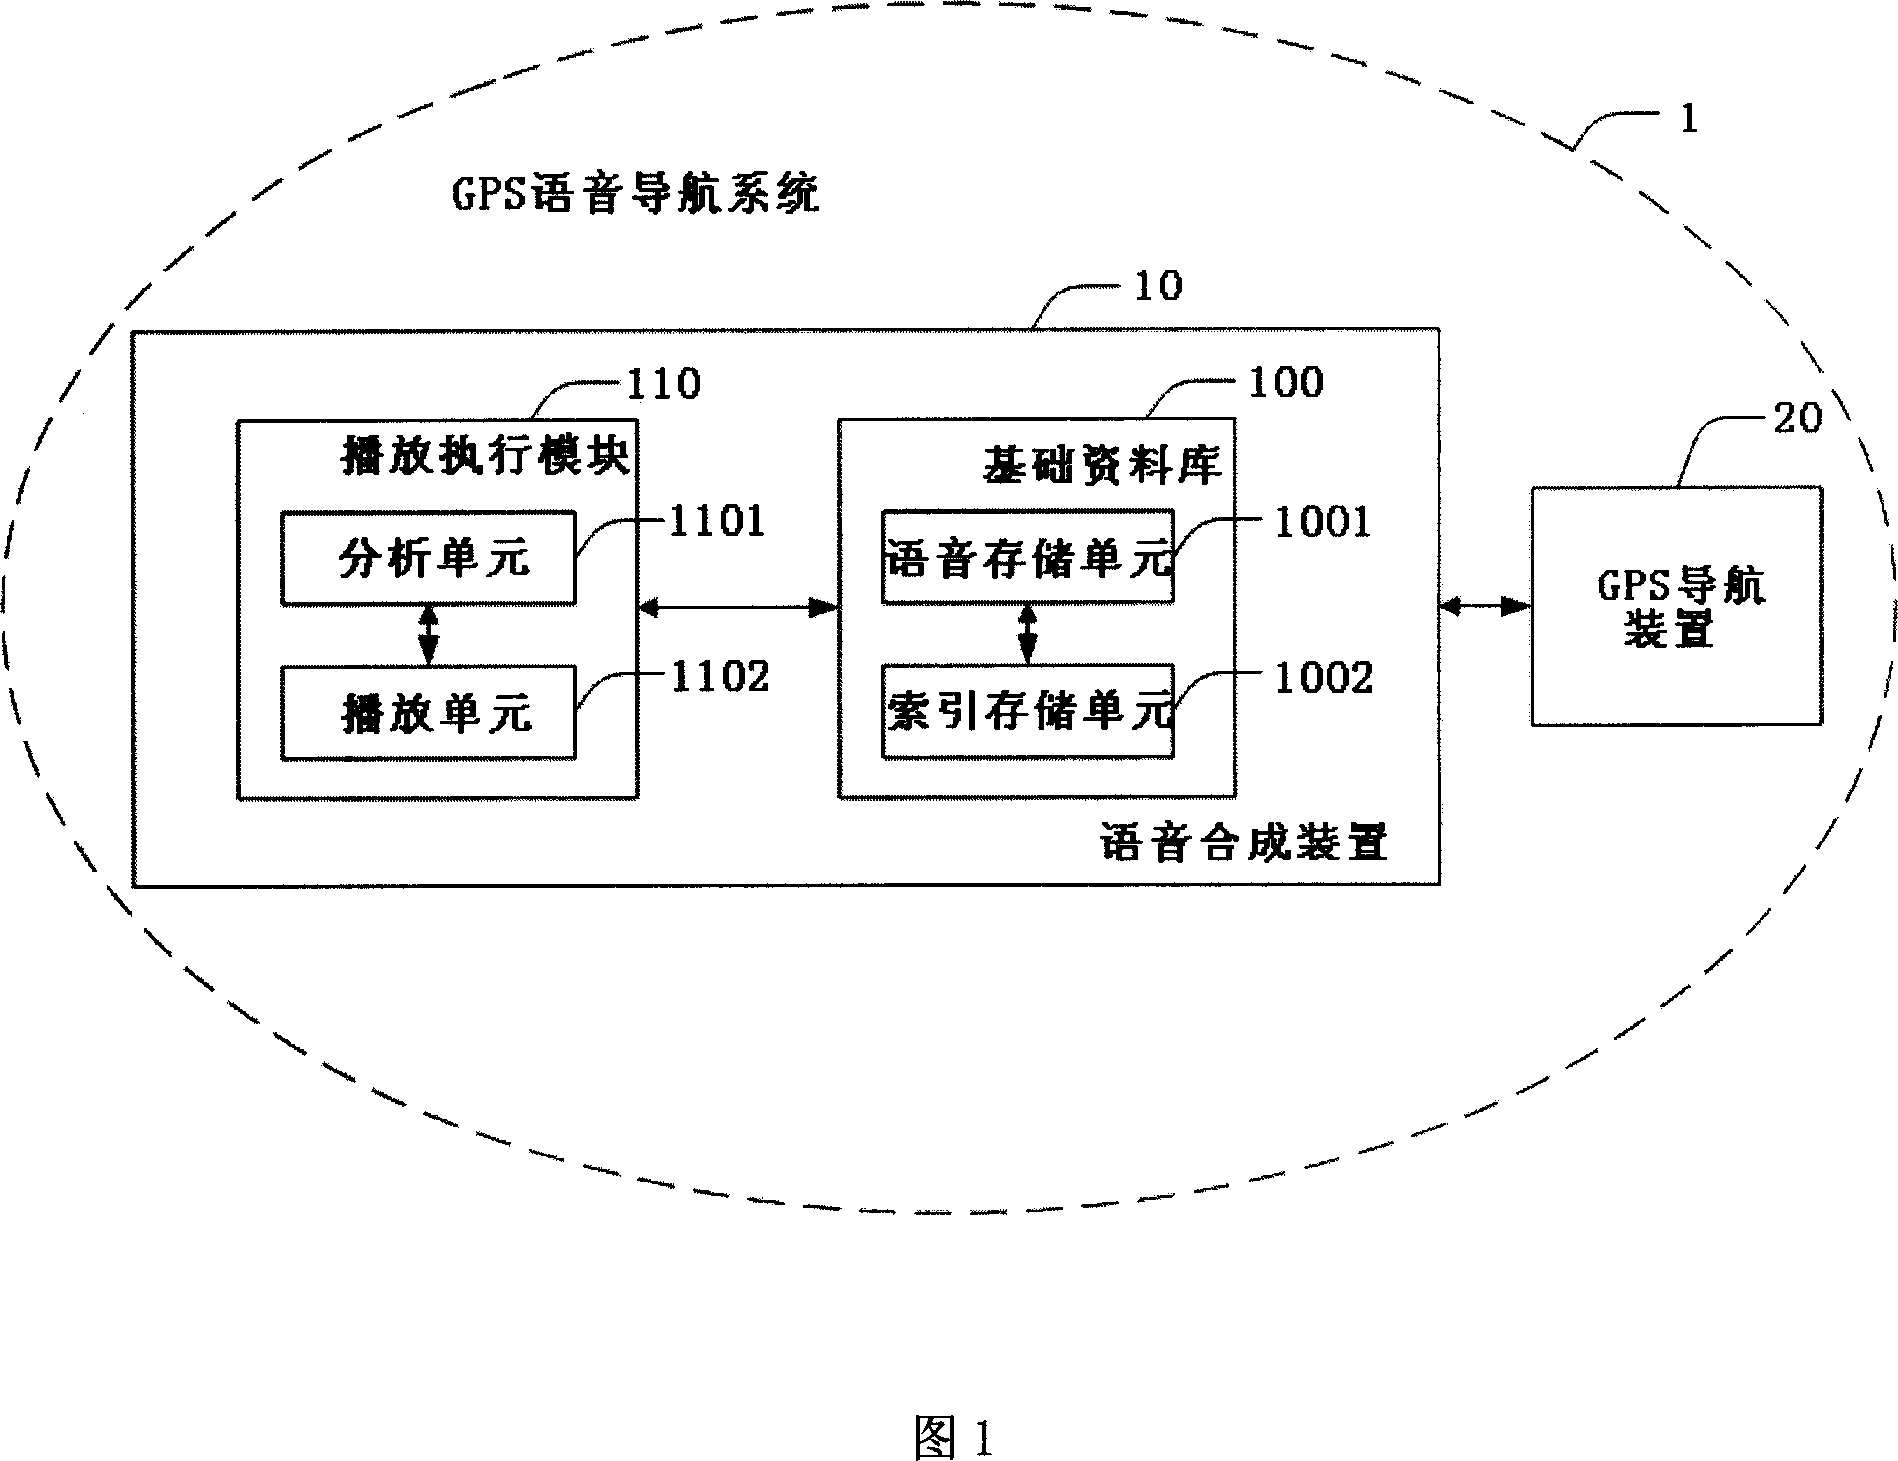 Speech synthesis device, speech synthesis method and GPS speech guide system